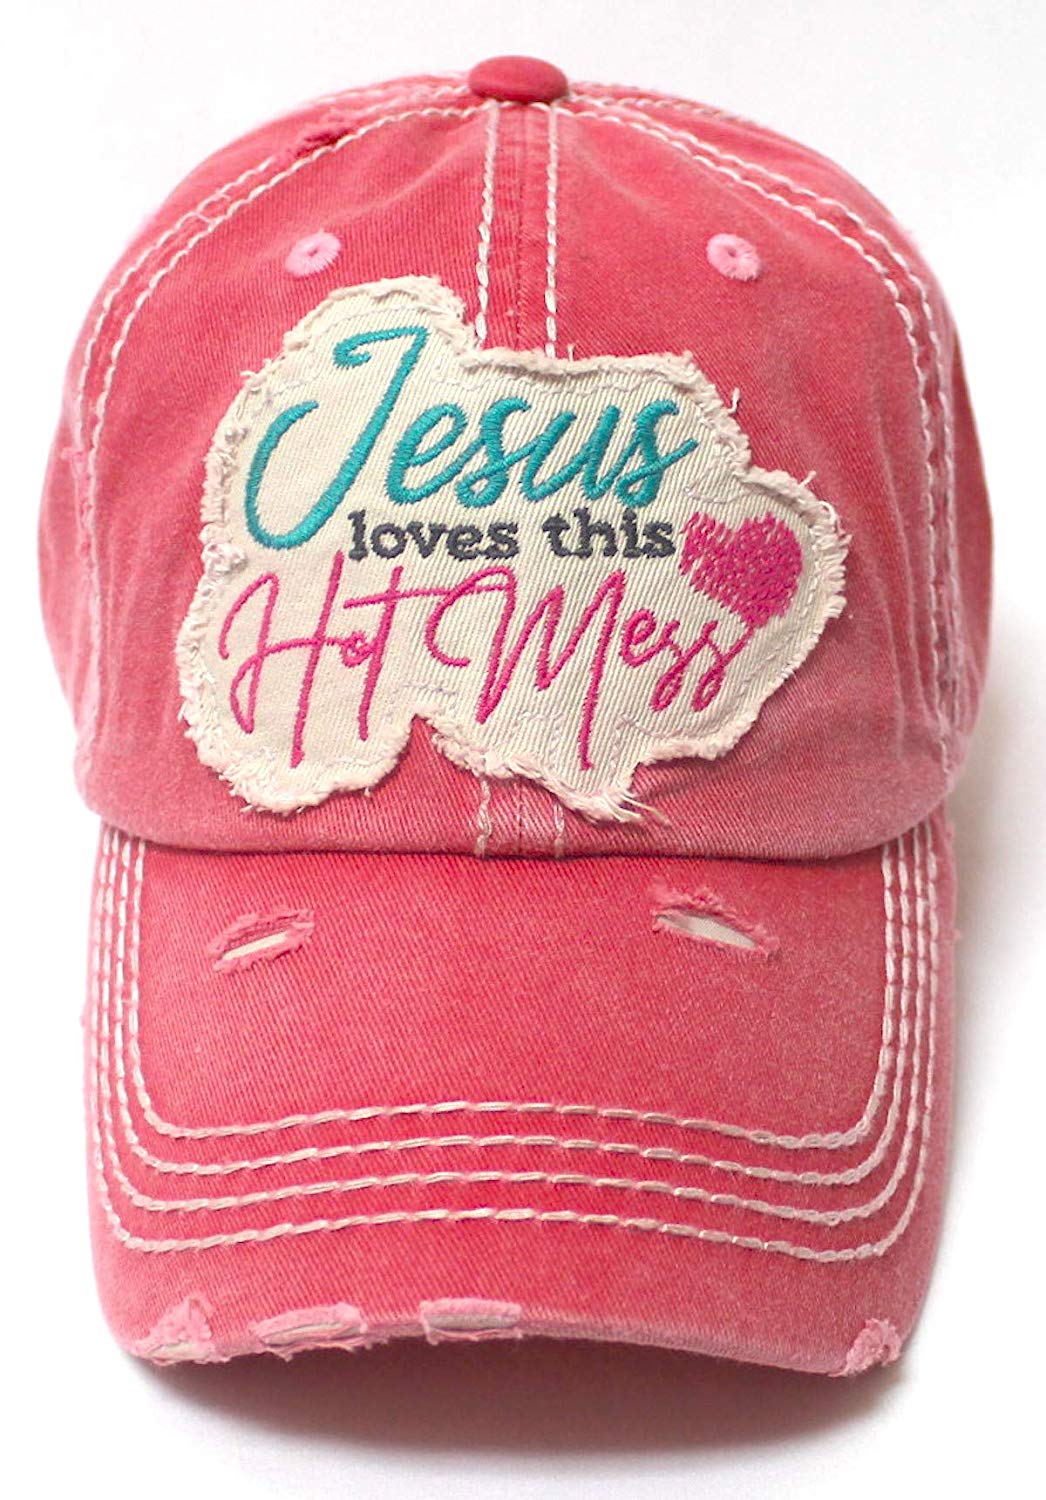 Women's Baseball Cap Jesus Loves This Hot Mess Heart Patch Embroidery Hat, Rose Pink - Caps 'N Vintage 